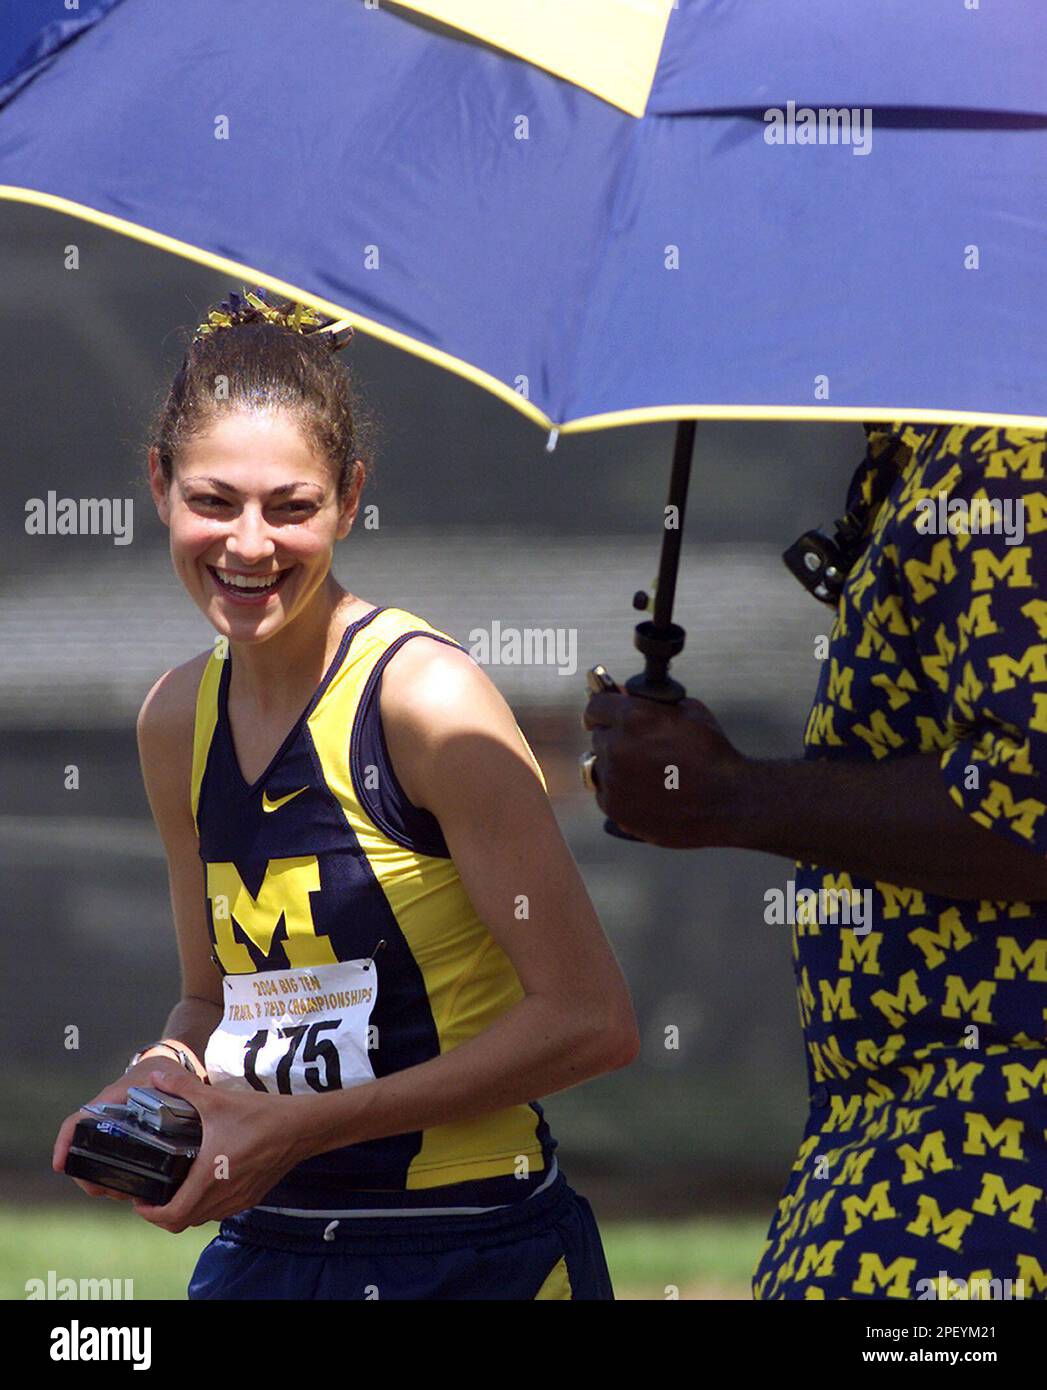 Lindsey Gallo of Michigan talks to one of her coaches Sunday, May